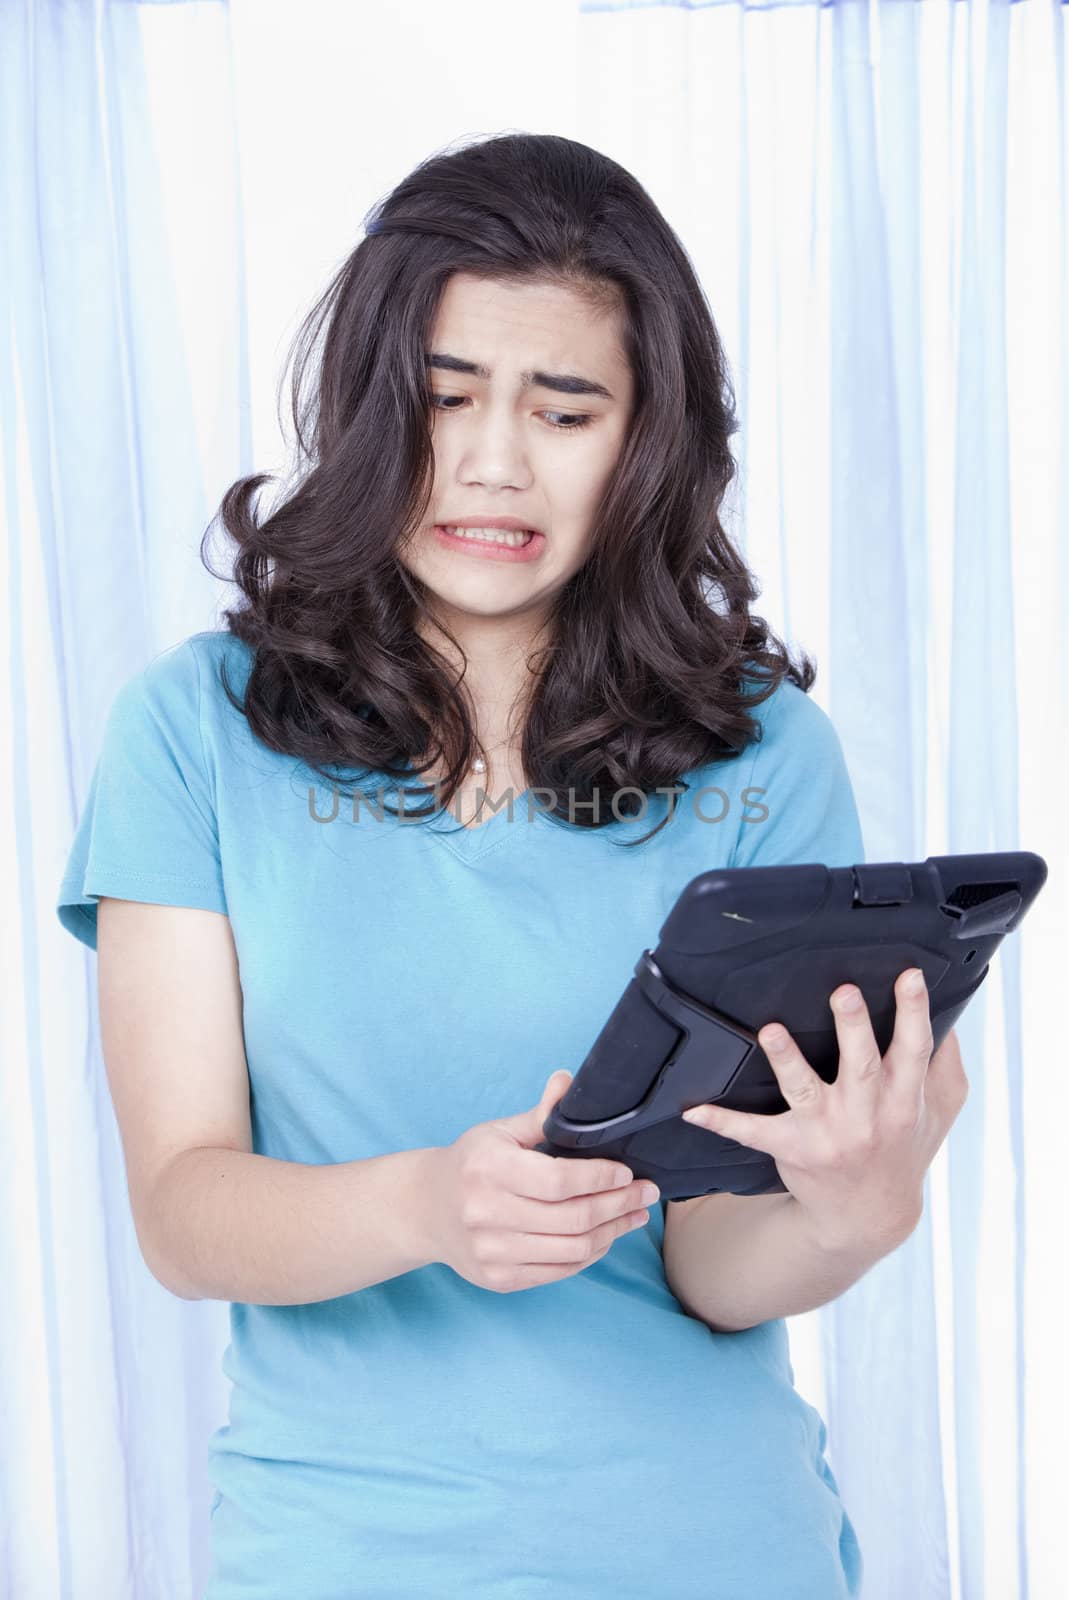 Teen girl looking with disgust or dislike towards computer tablet in hand